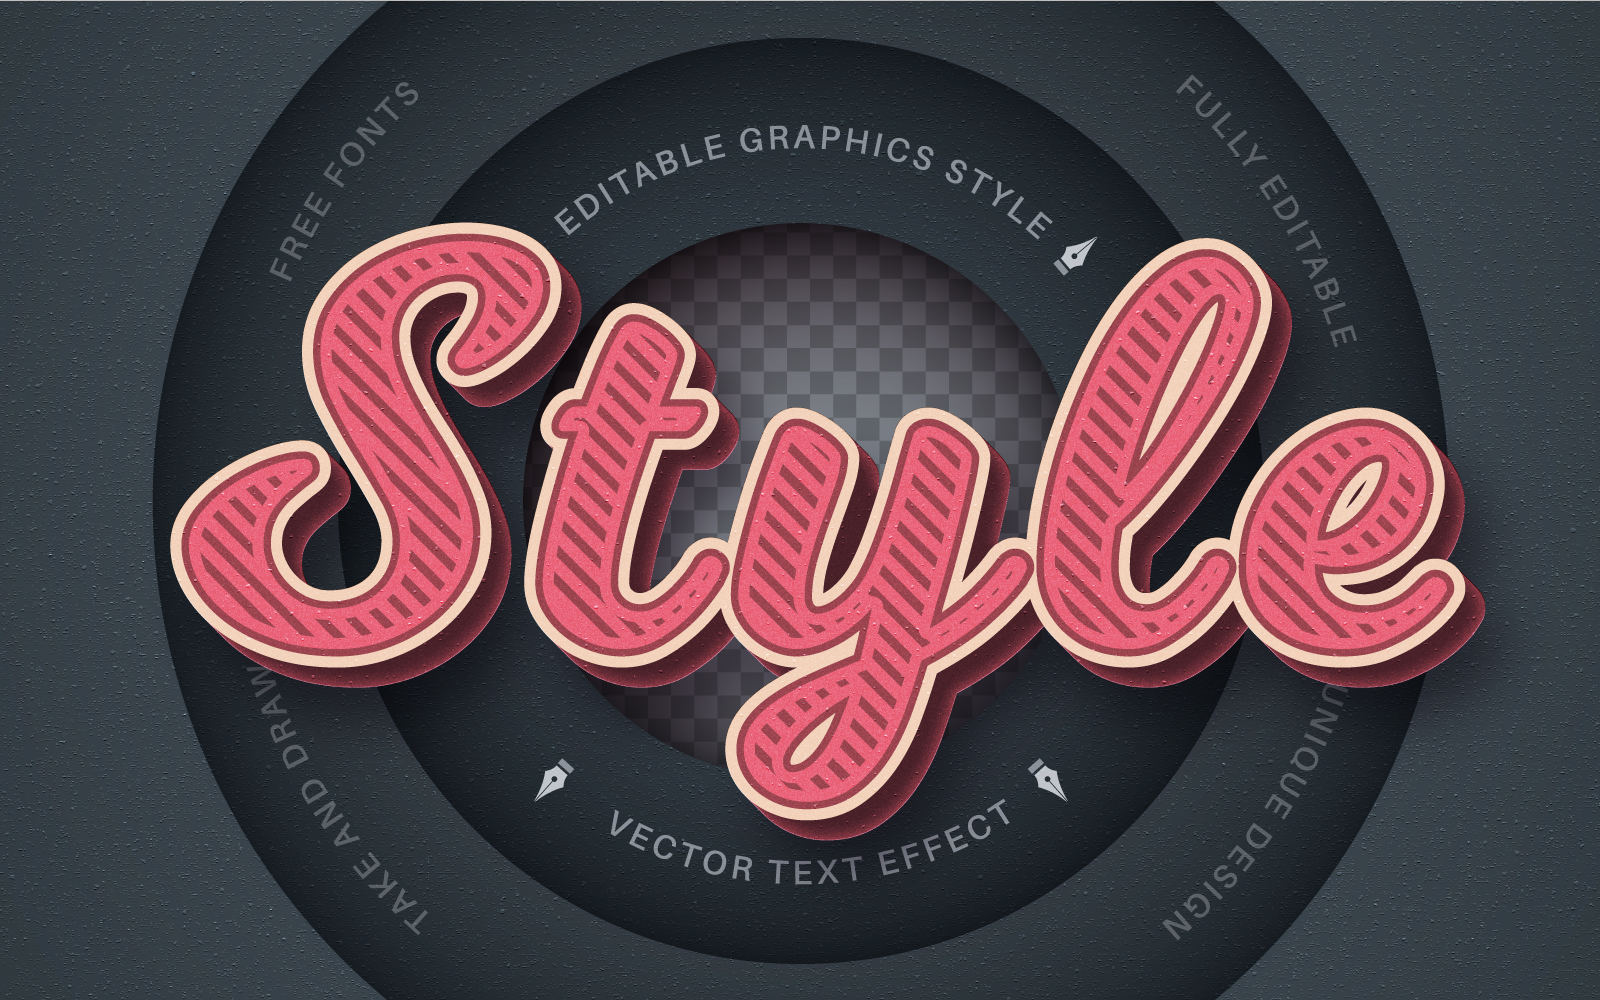 Retro Style - Editable Text Effect, Font Style